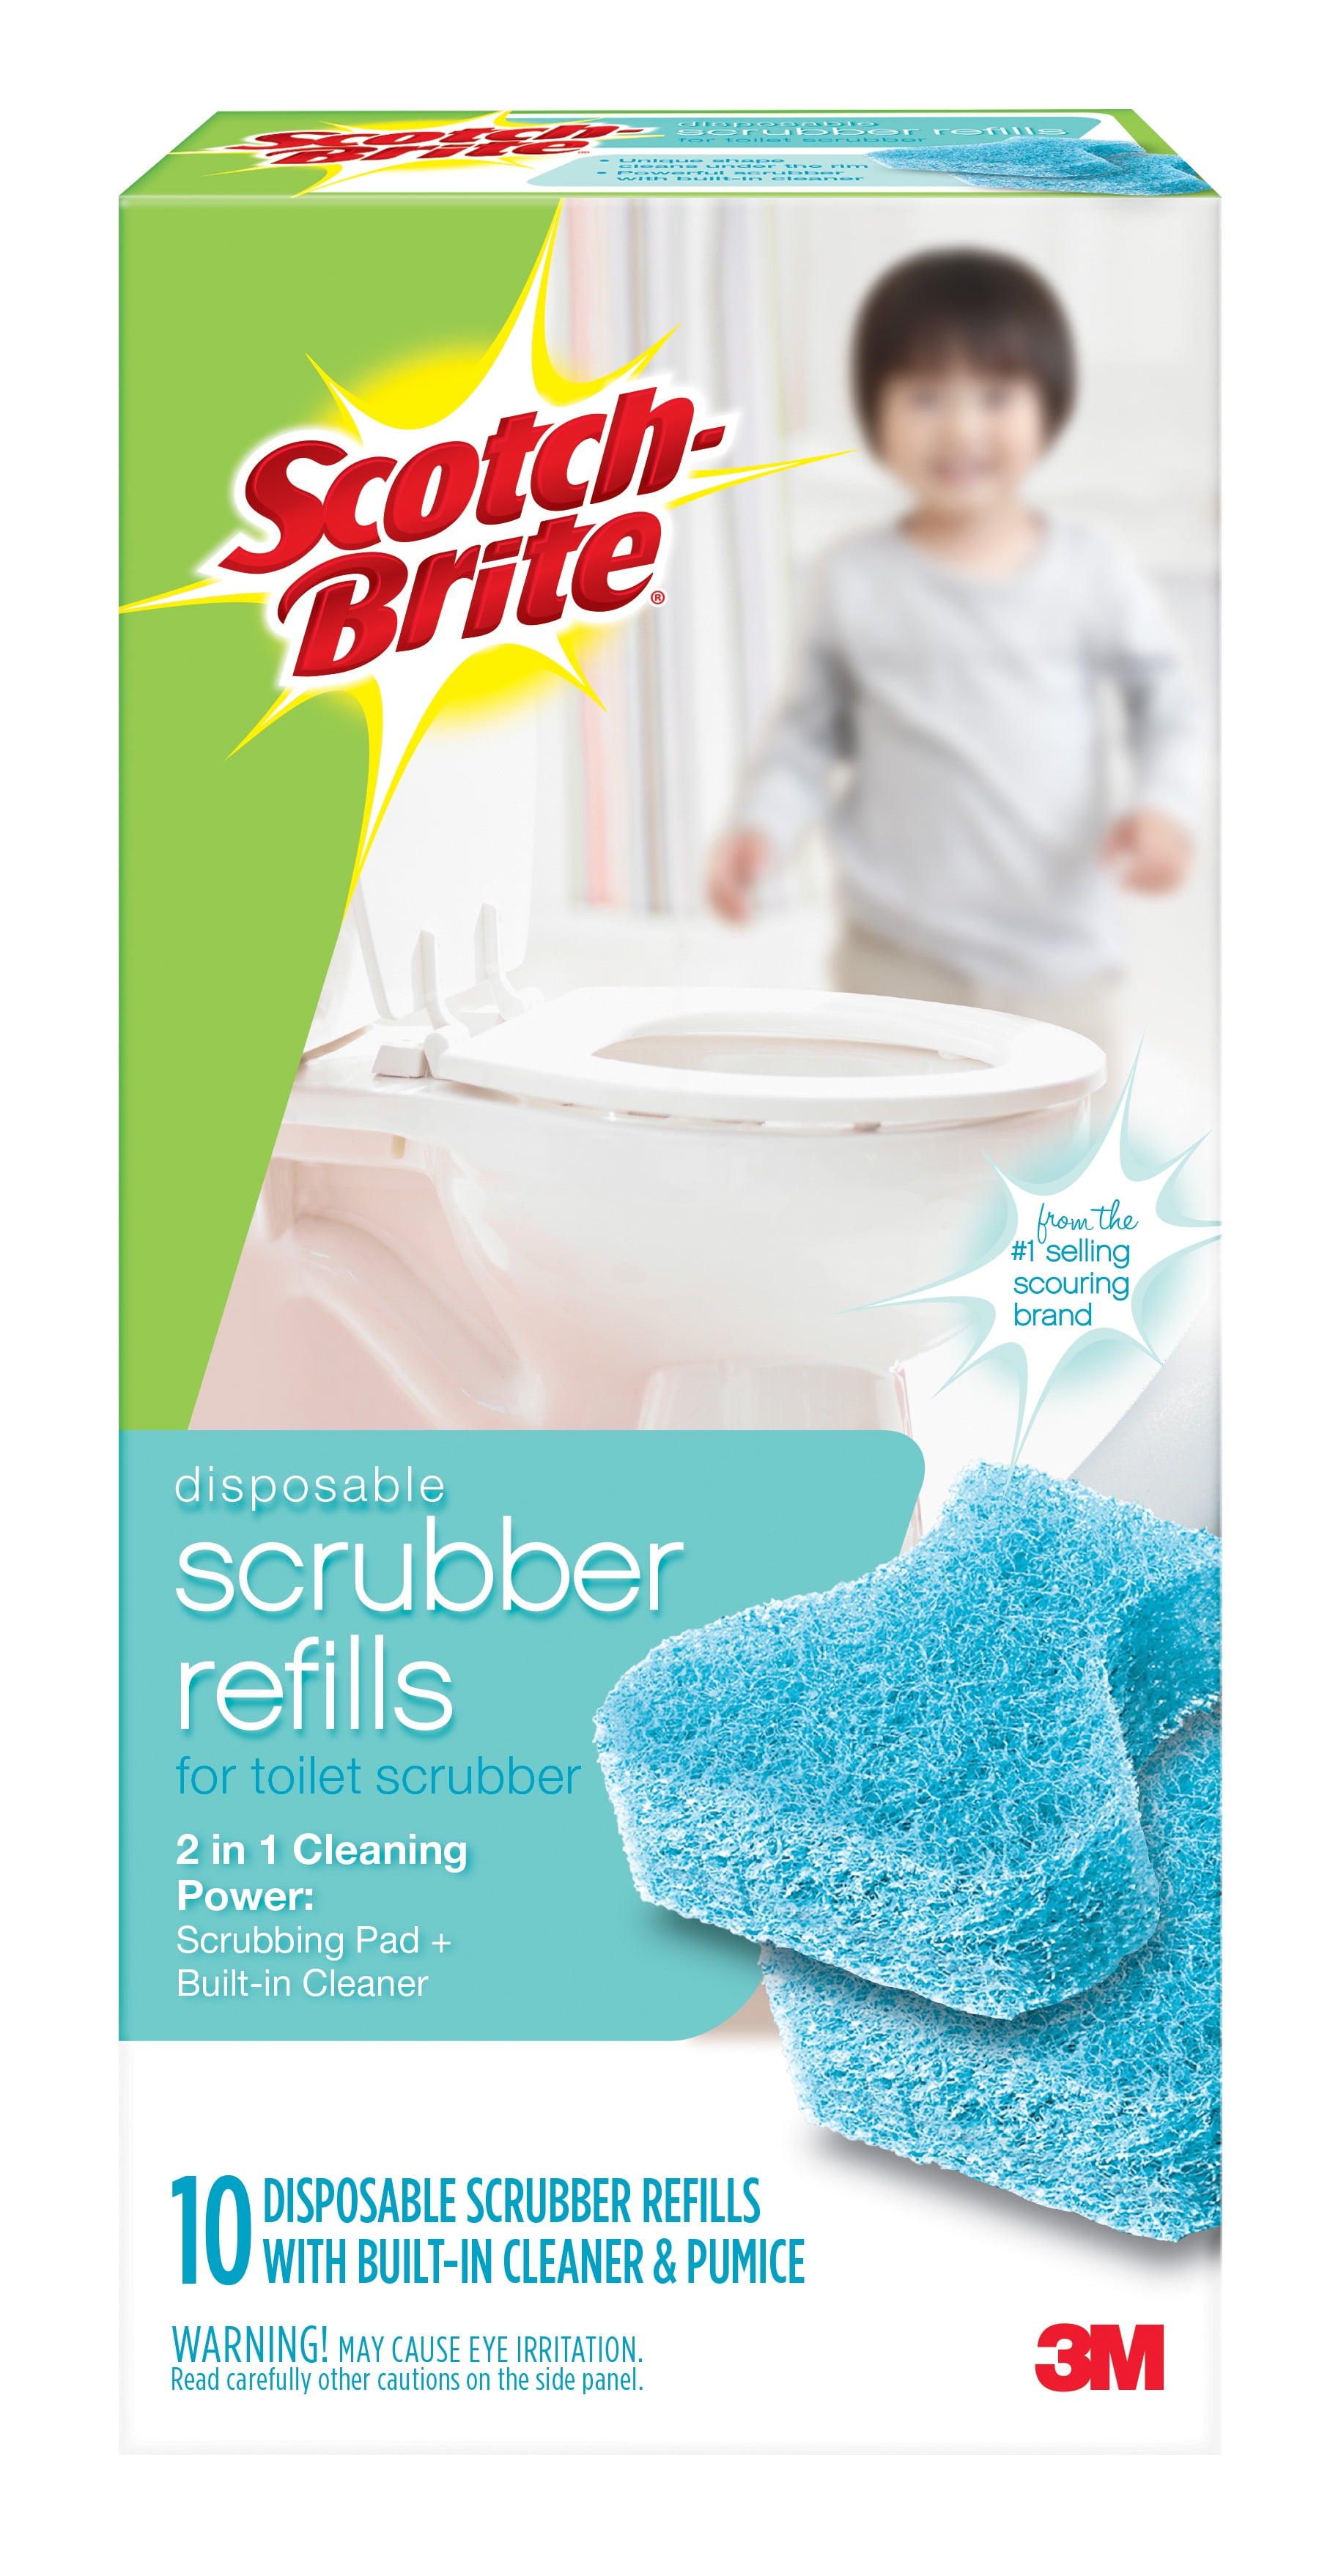 3 Pack of Scotch-Brite Disposable Toilet Scrubber Refills 10 refills each 